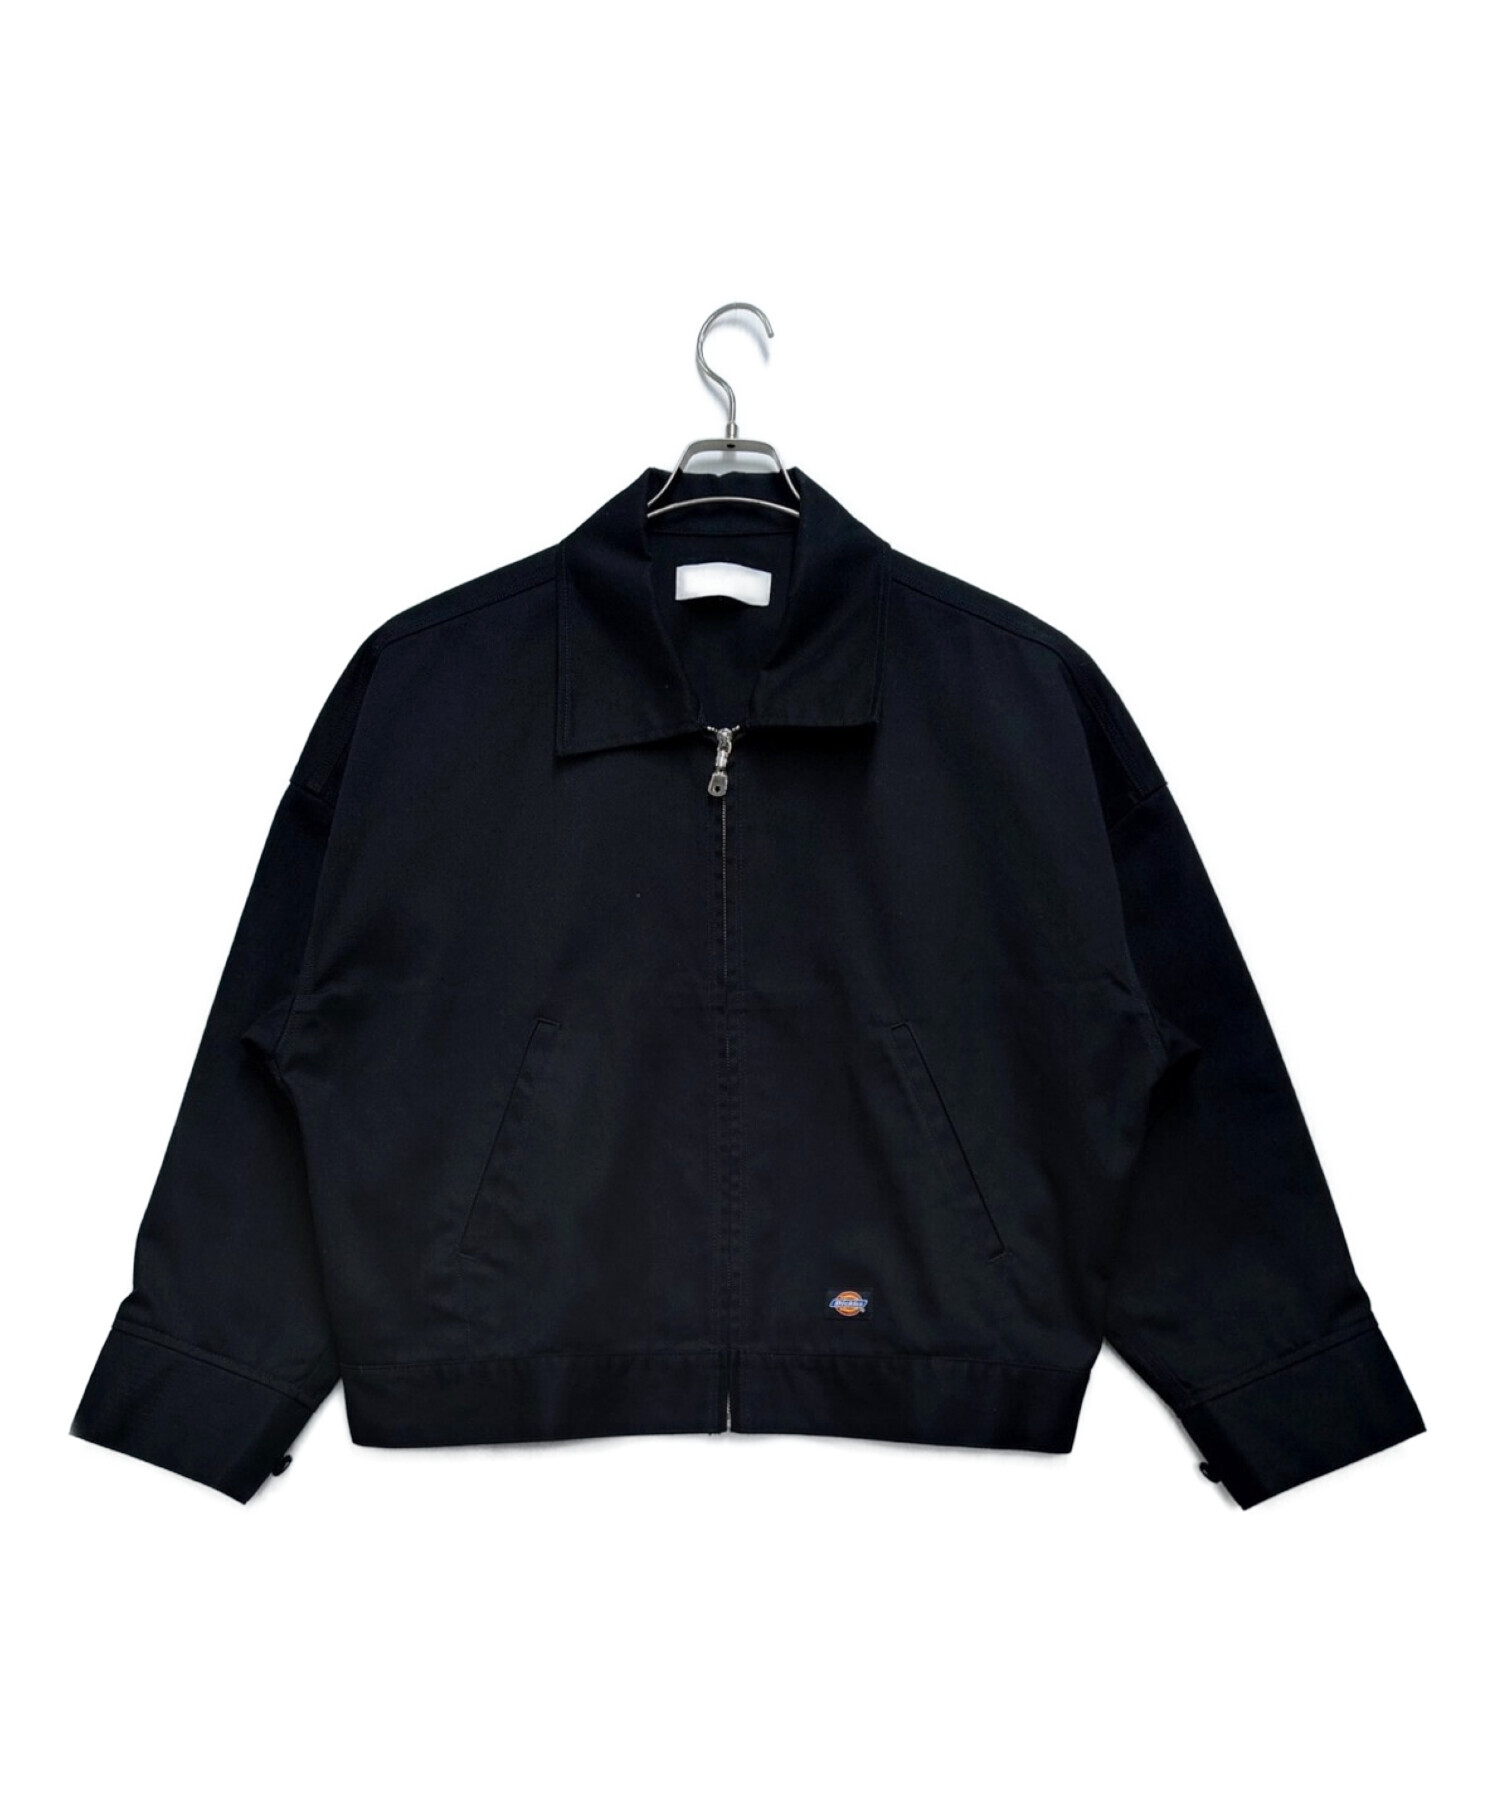 NEON SIGN Dickies Jacket - ブルゾン